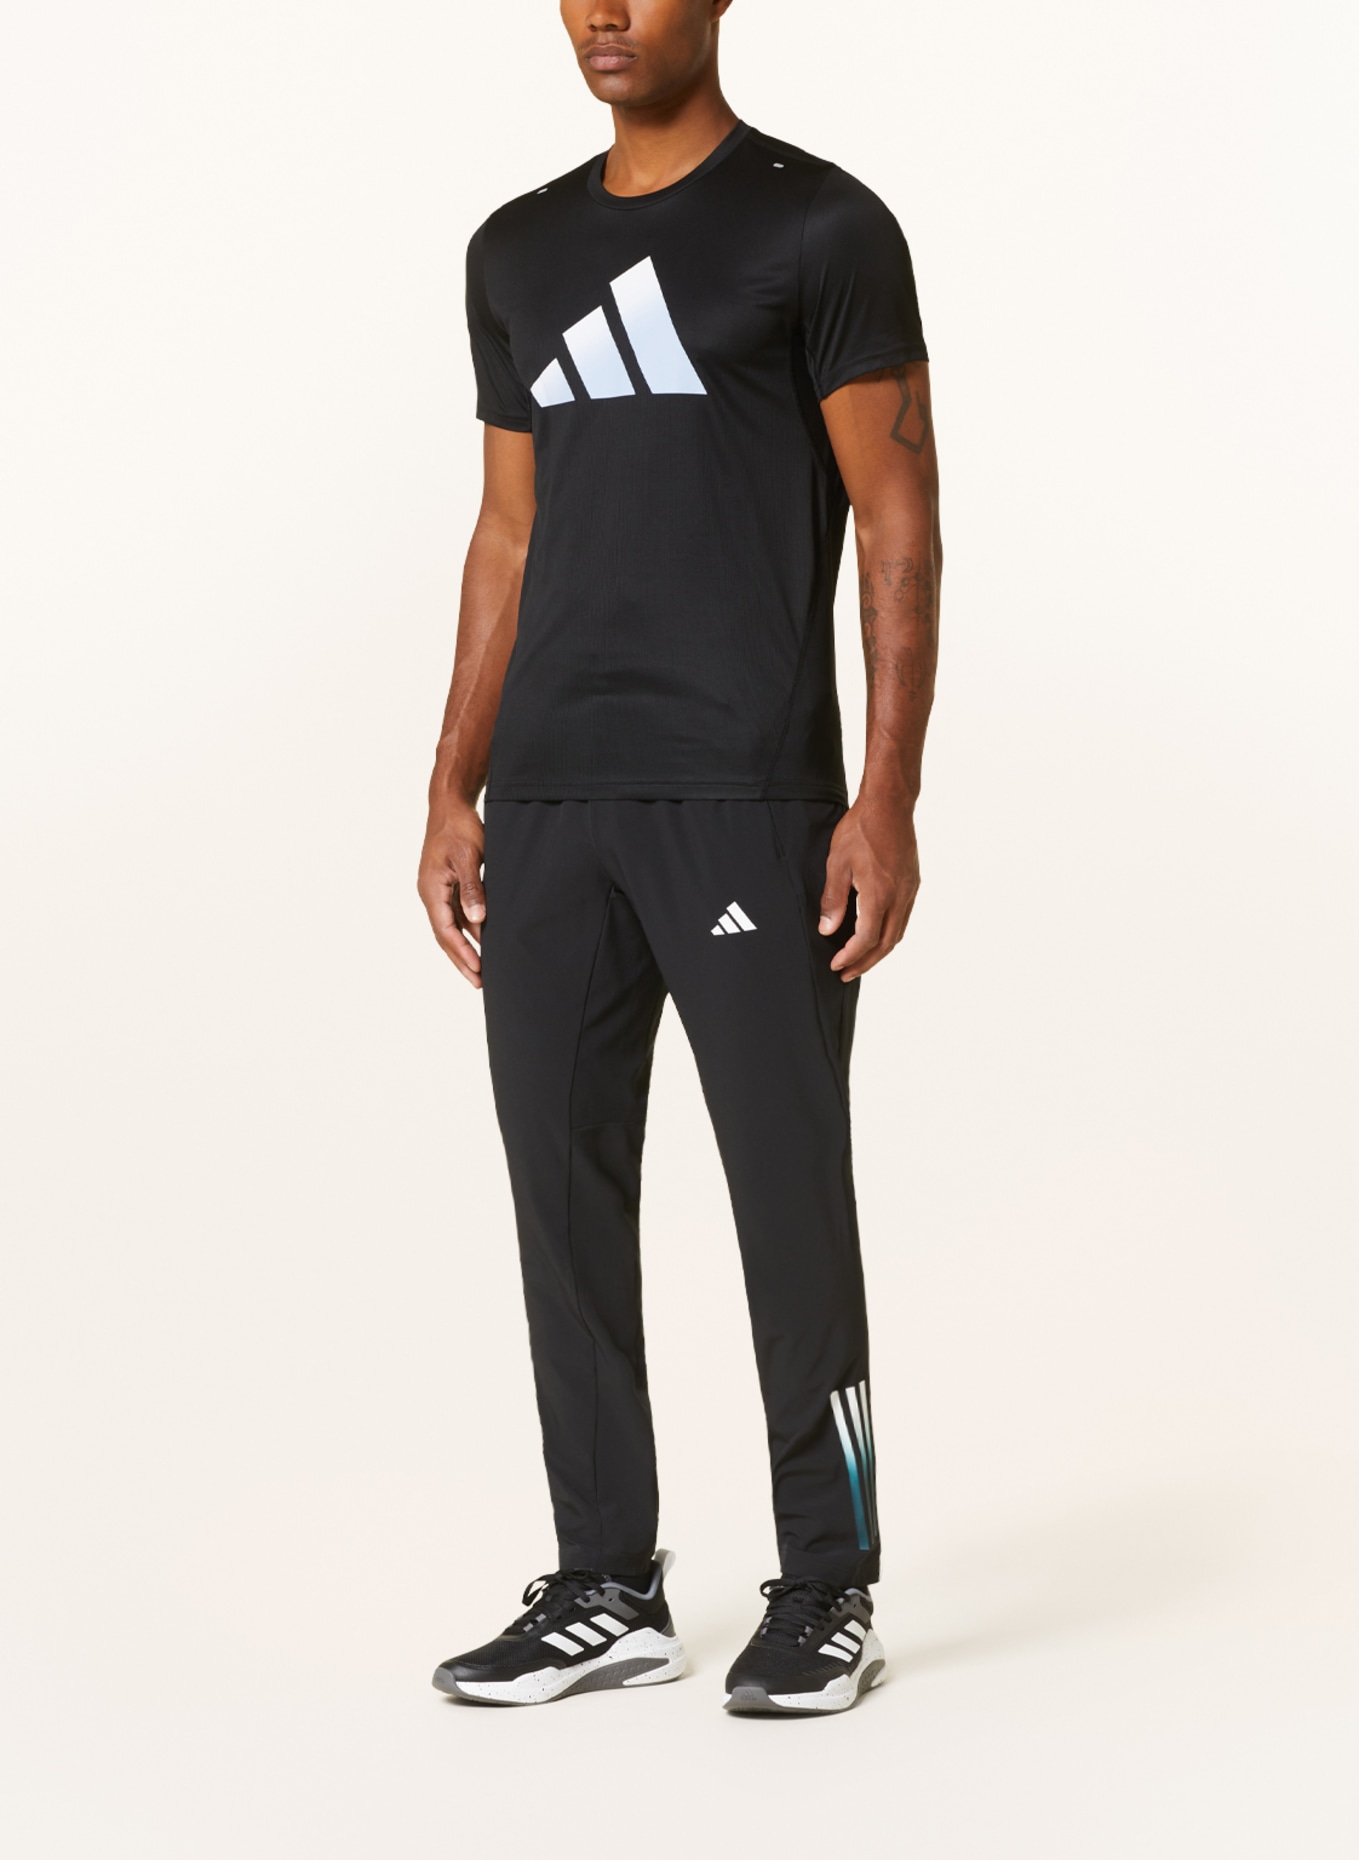 adidas Running pants OWN THE RUN ASTRO in black